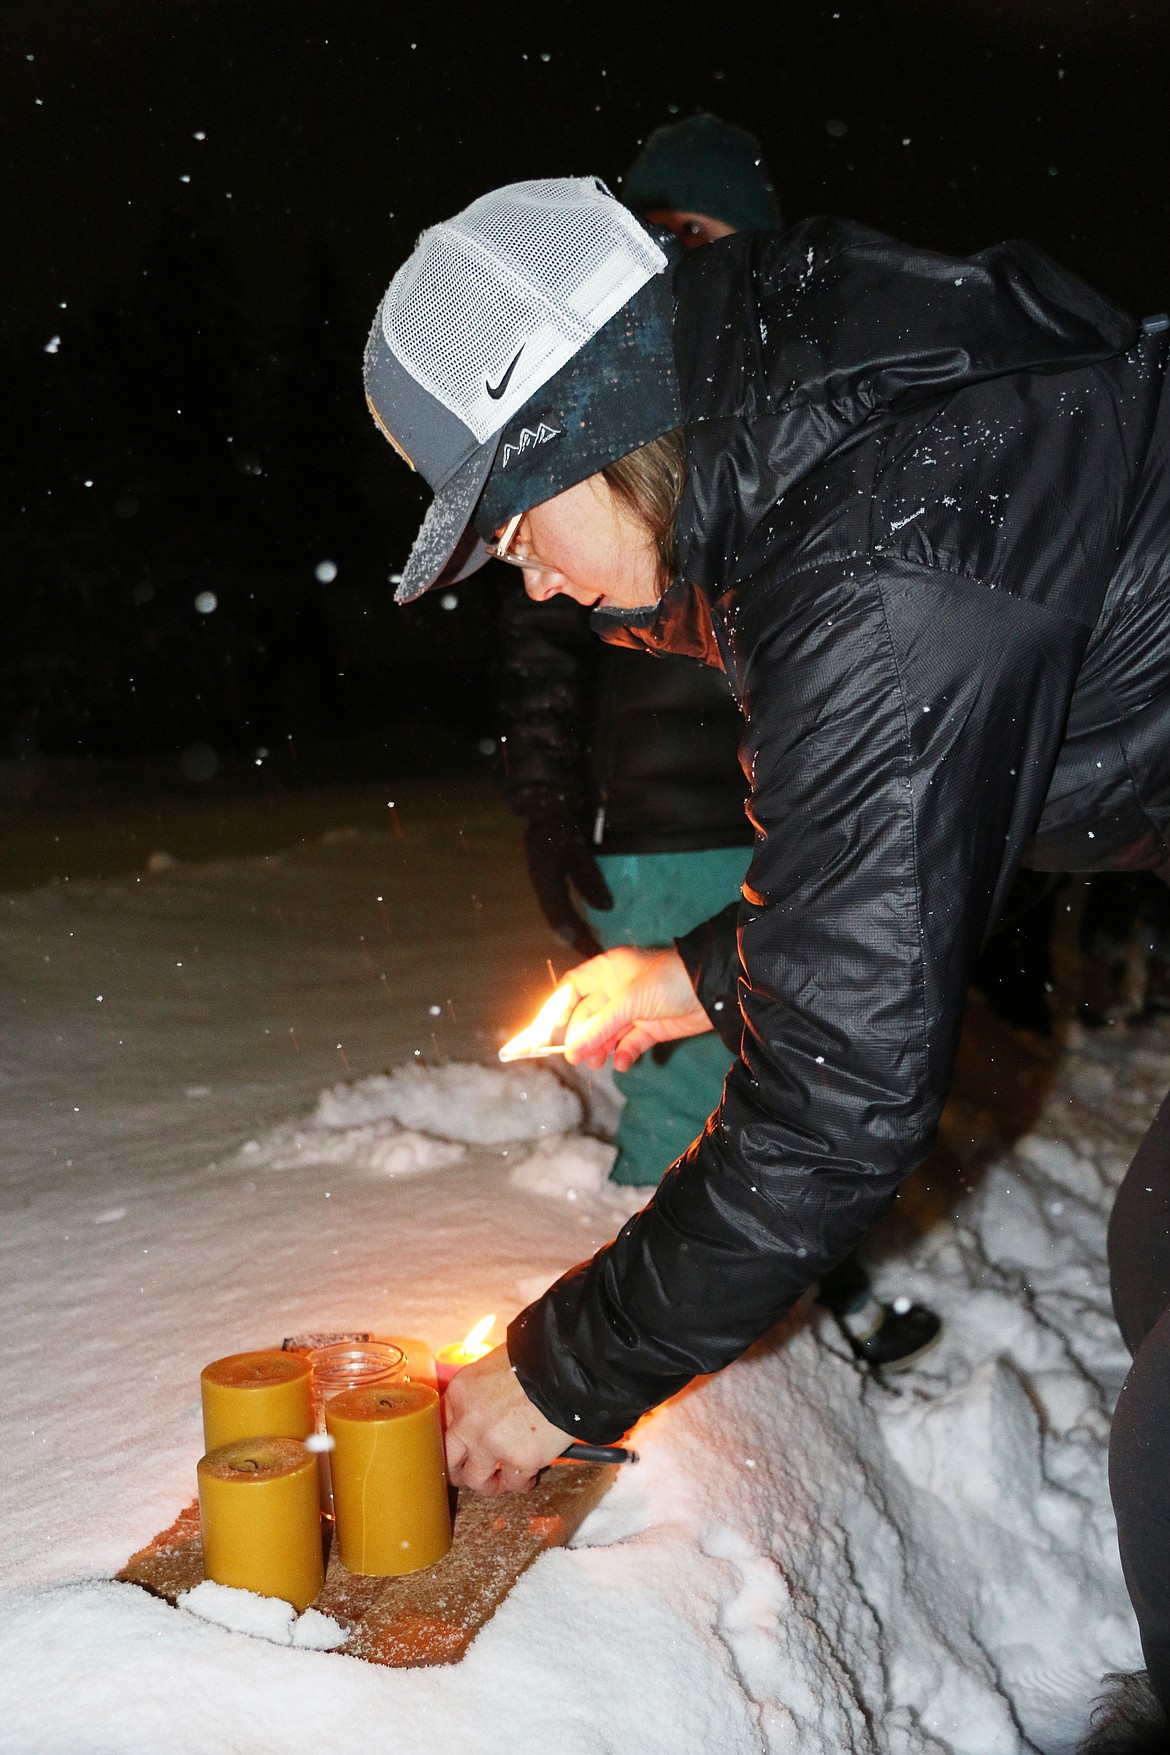 University of Idaho professor Elizabeth Wargo lights a candle at Lakeview Park during a candlelight vigil in Sandpoint to honor four UI students killed Nov. 13.